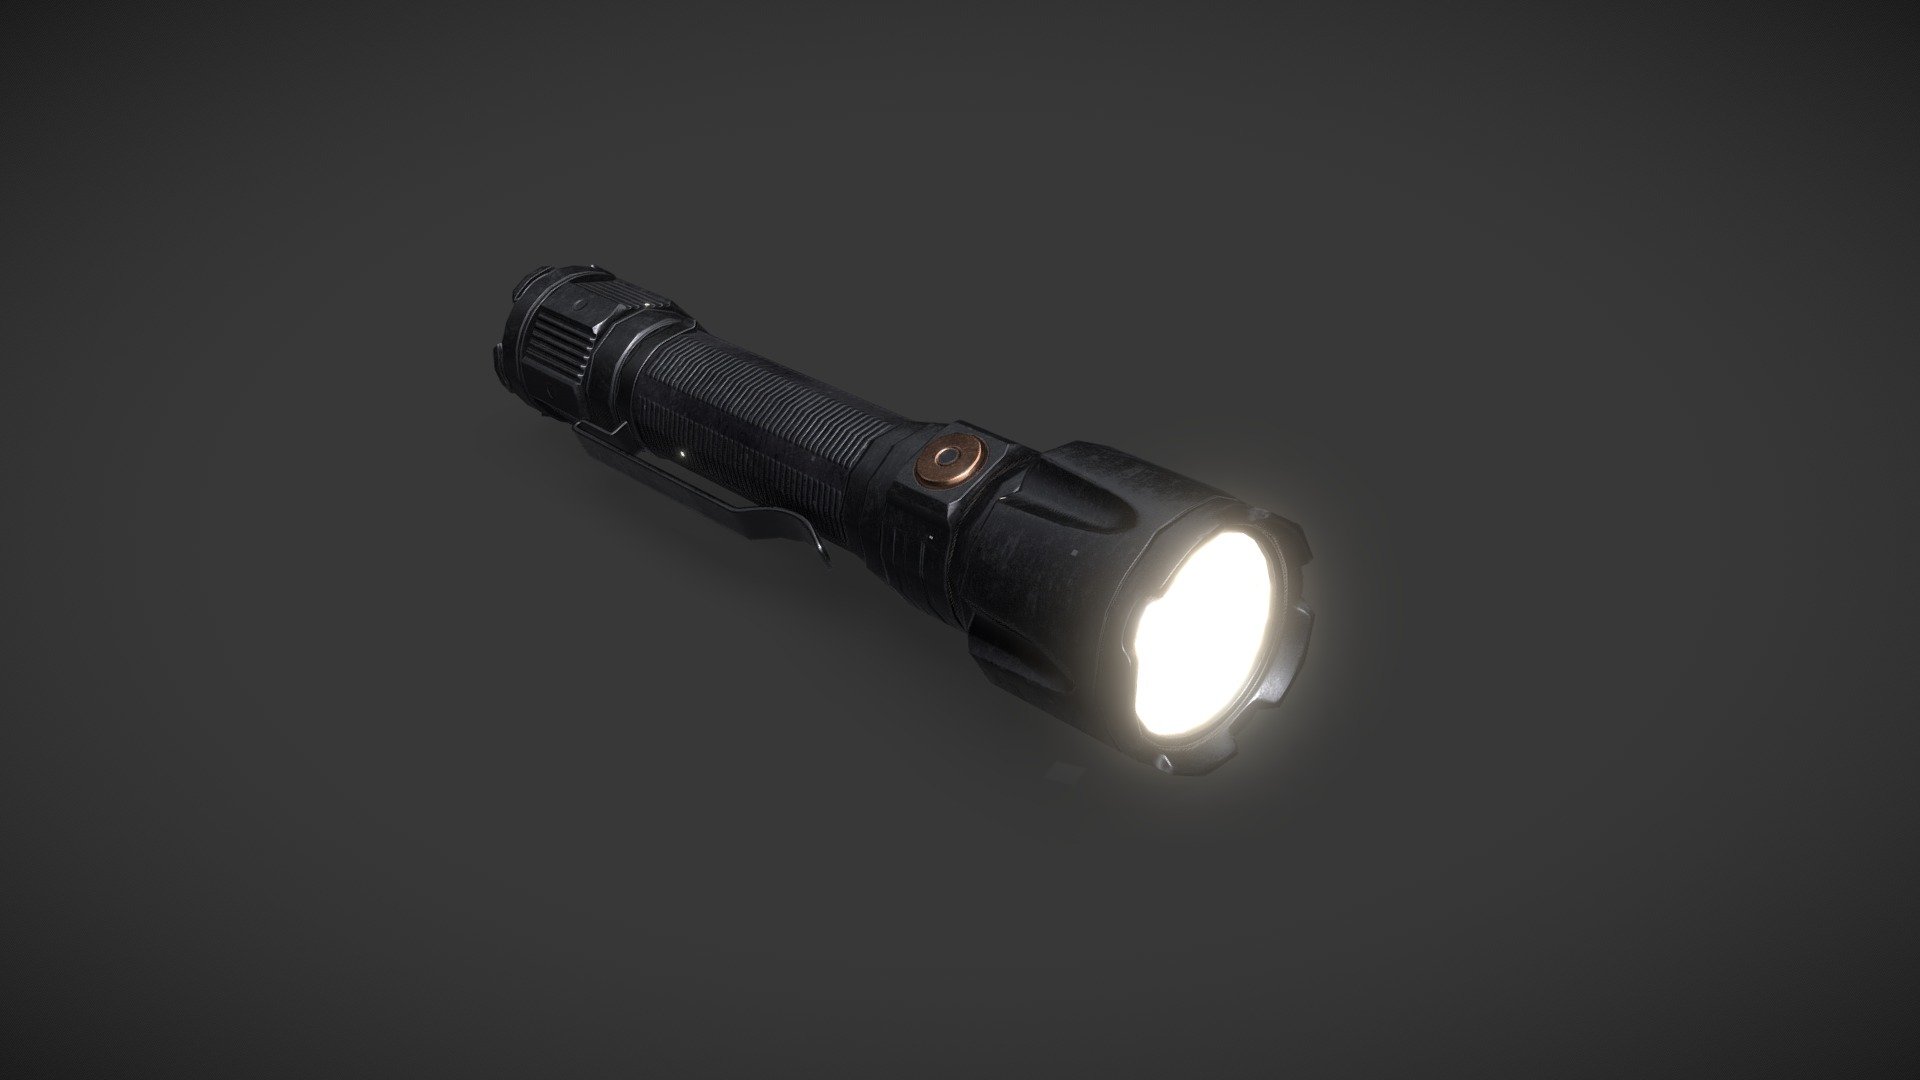 Just a handheld flashlight. I made it because it was lying on my desk while I was working. There were no other reasons :)
Possibly suitable for some &ldquo;horror game with a monster